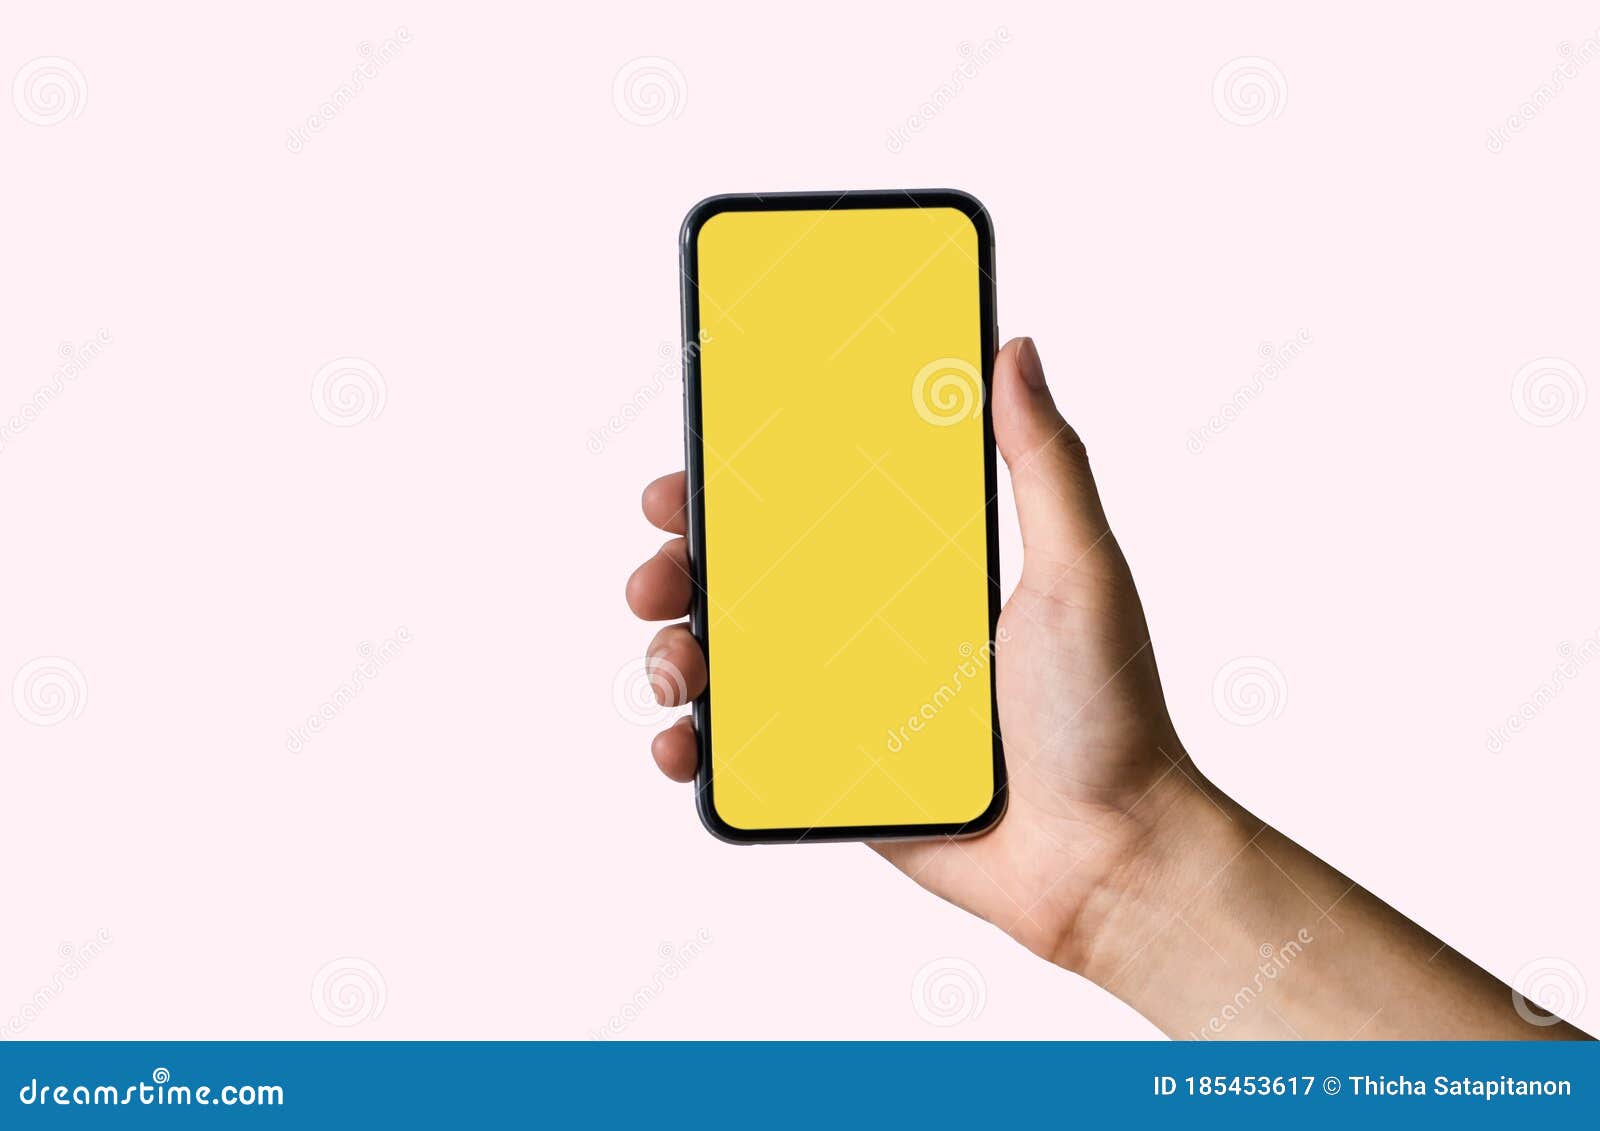 Holding White Mobile with Blank Yellow Screen. Stock - Image of communication, 185453617